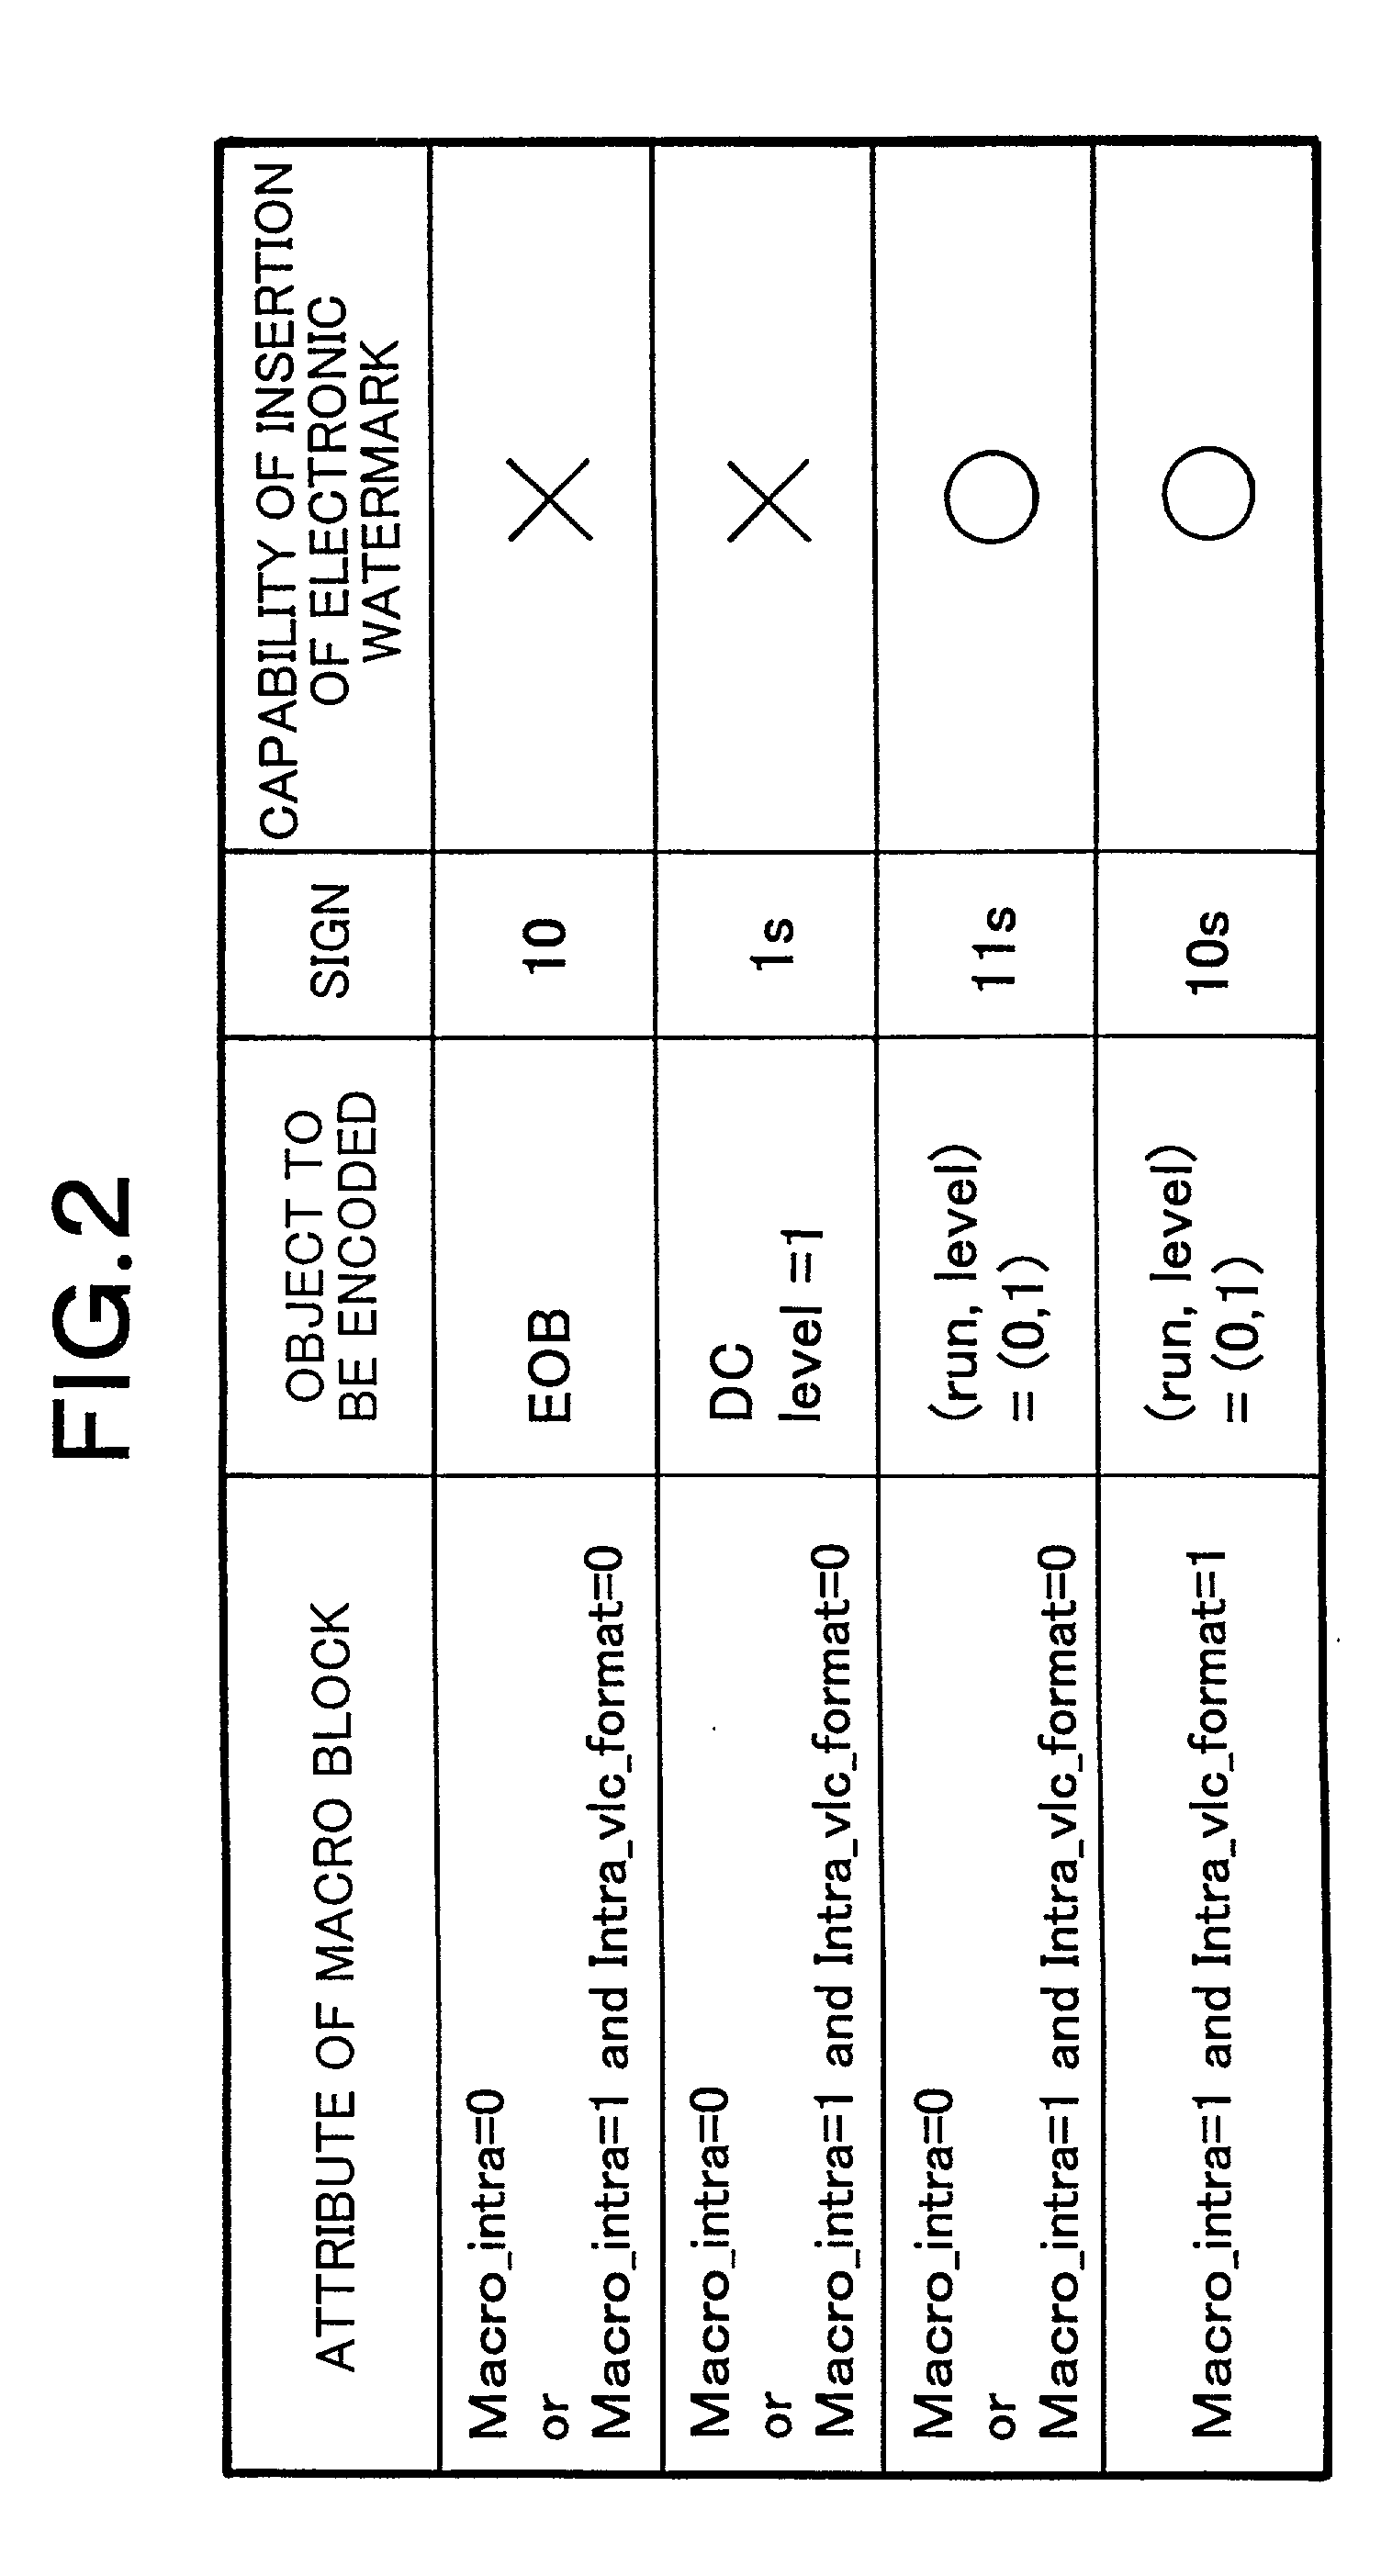 System and method for preventing input of variable length codes from being interrupted